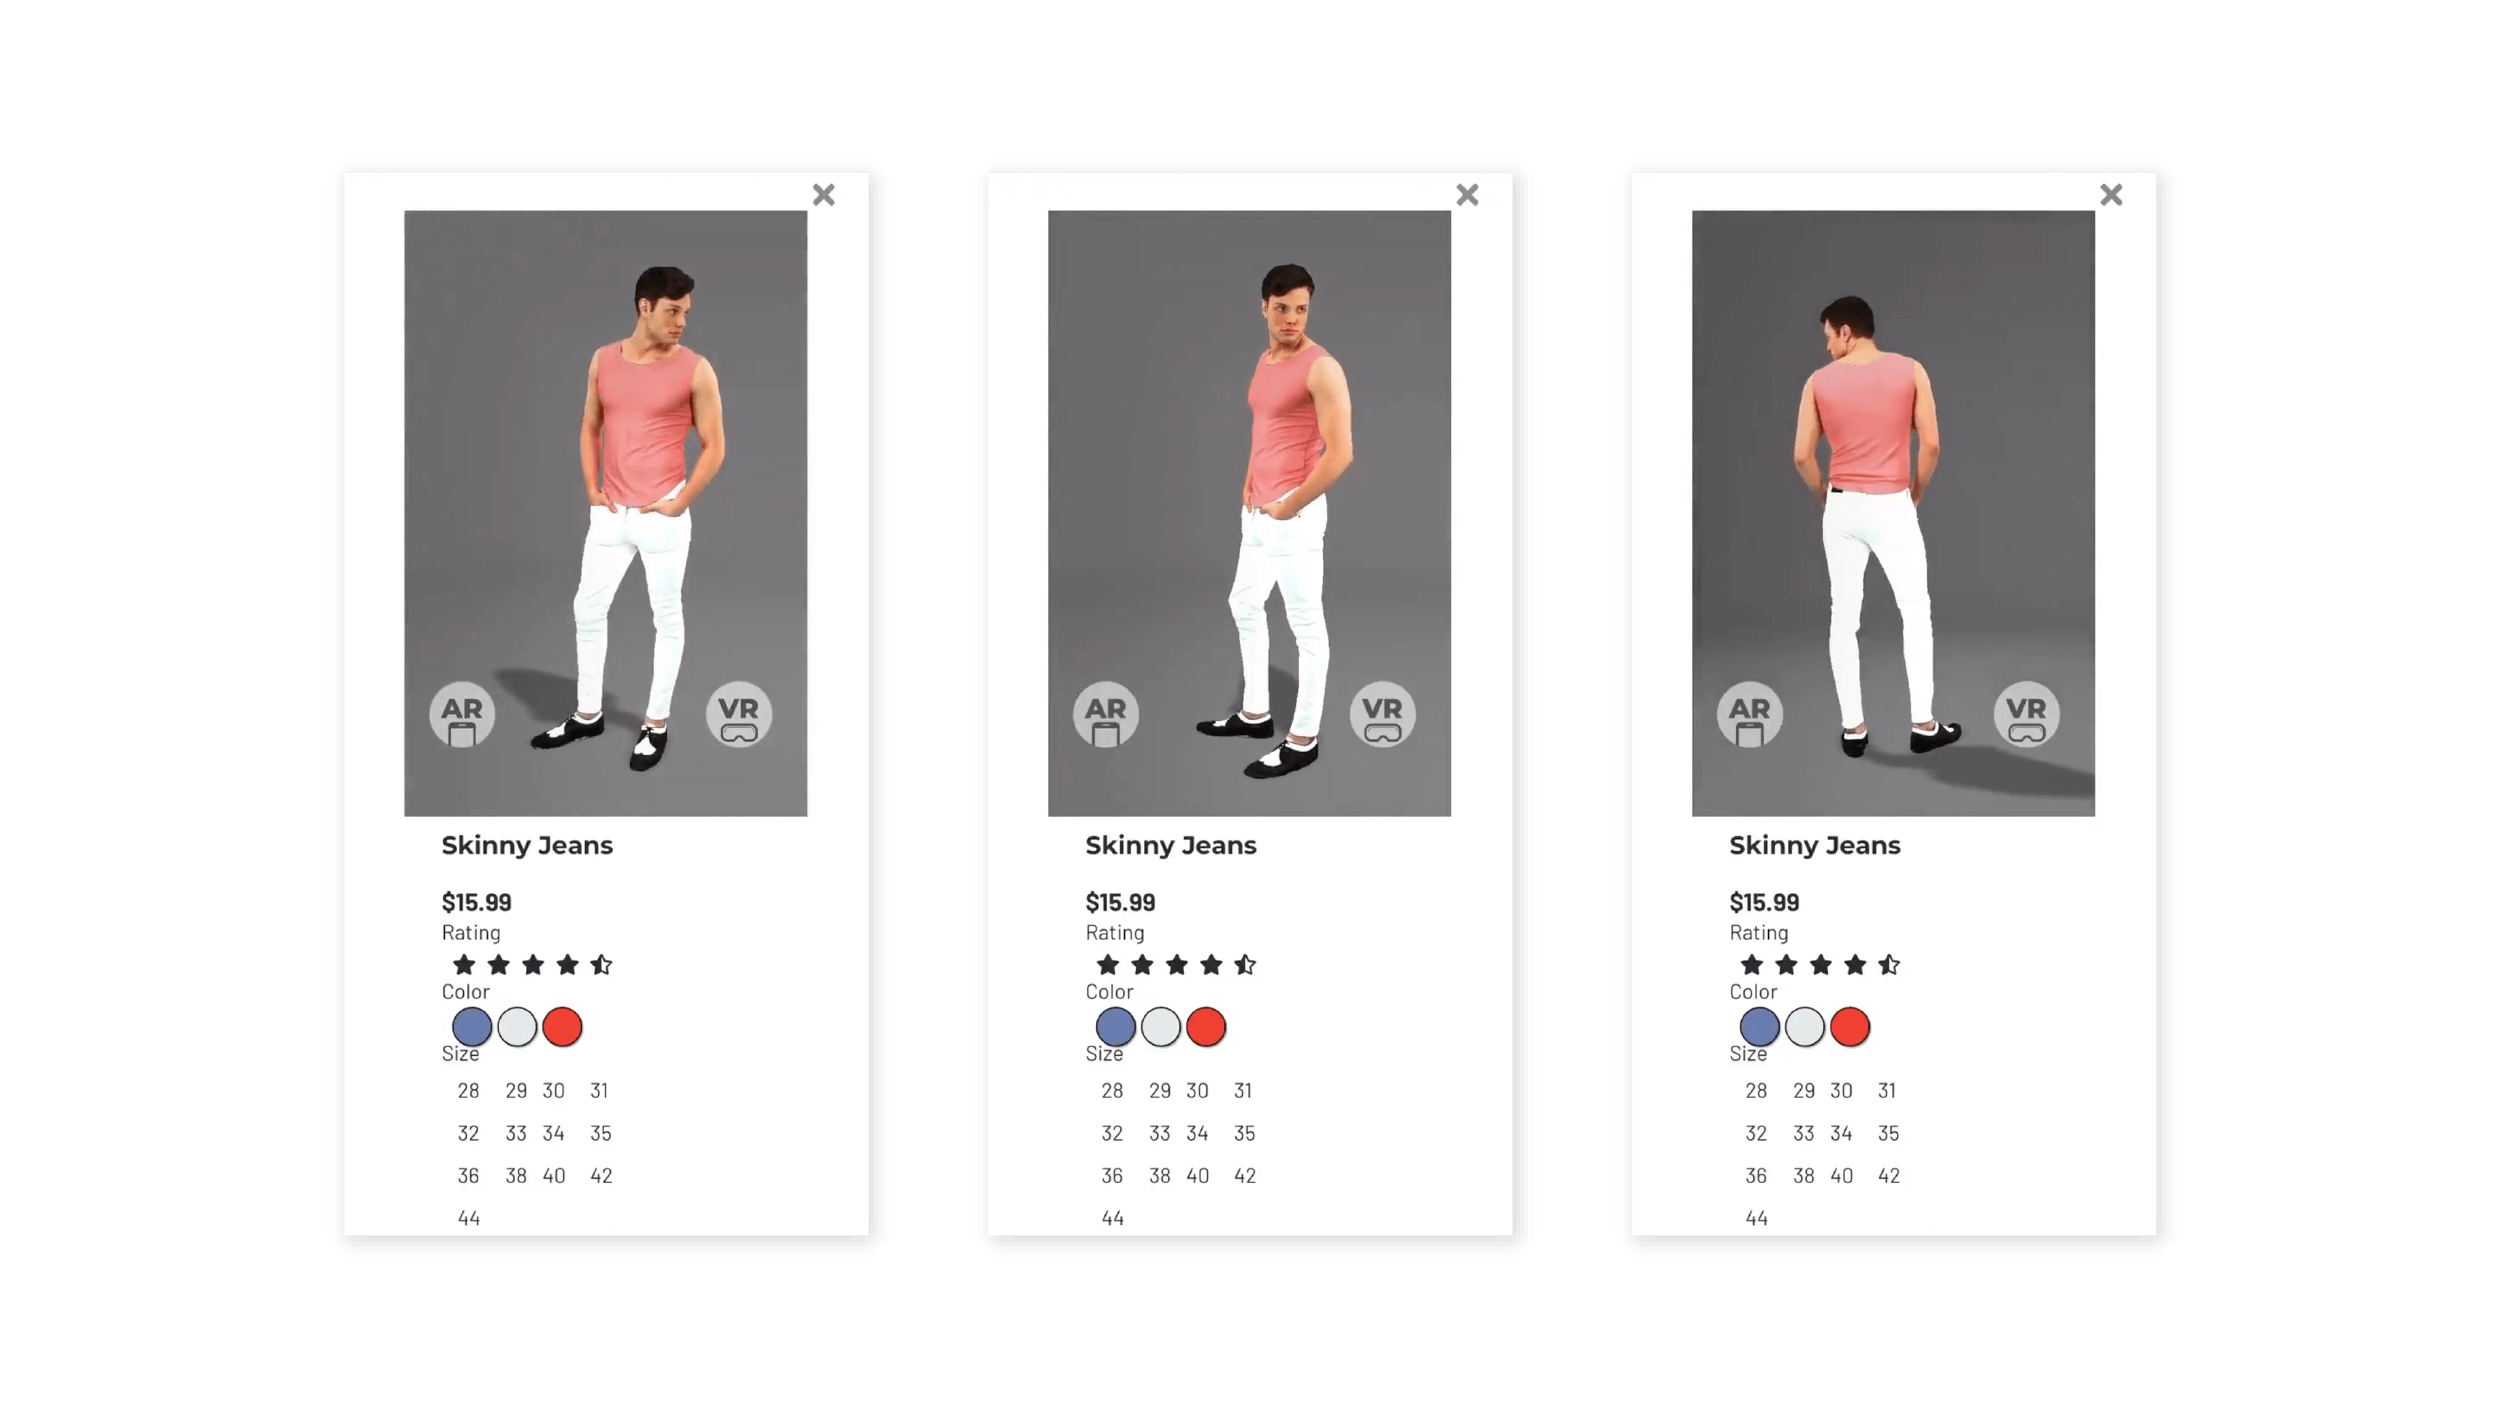 Microsoft - Unique Detail Gallery - AR - Augmented Reality - Users - Fashion - Garments - Visualization - sizing - Color - Rating - Price